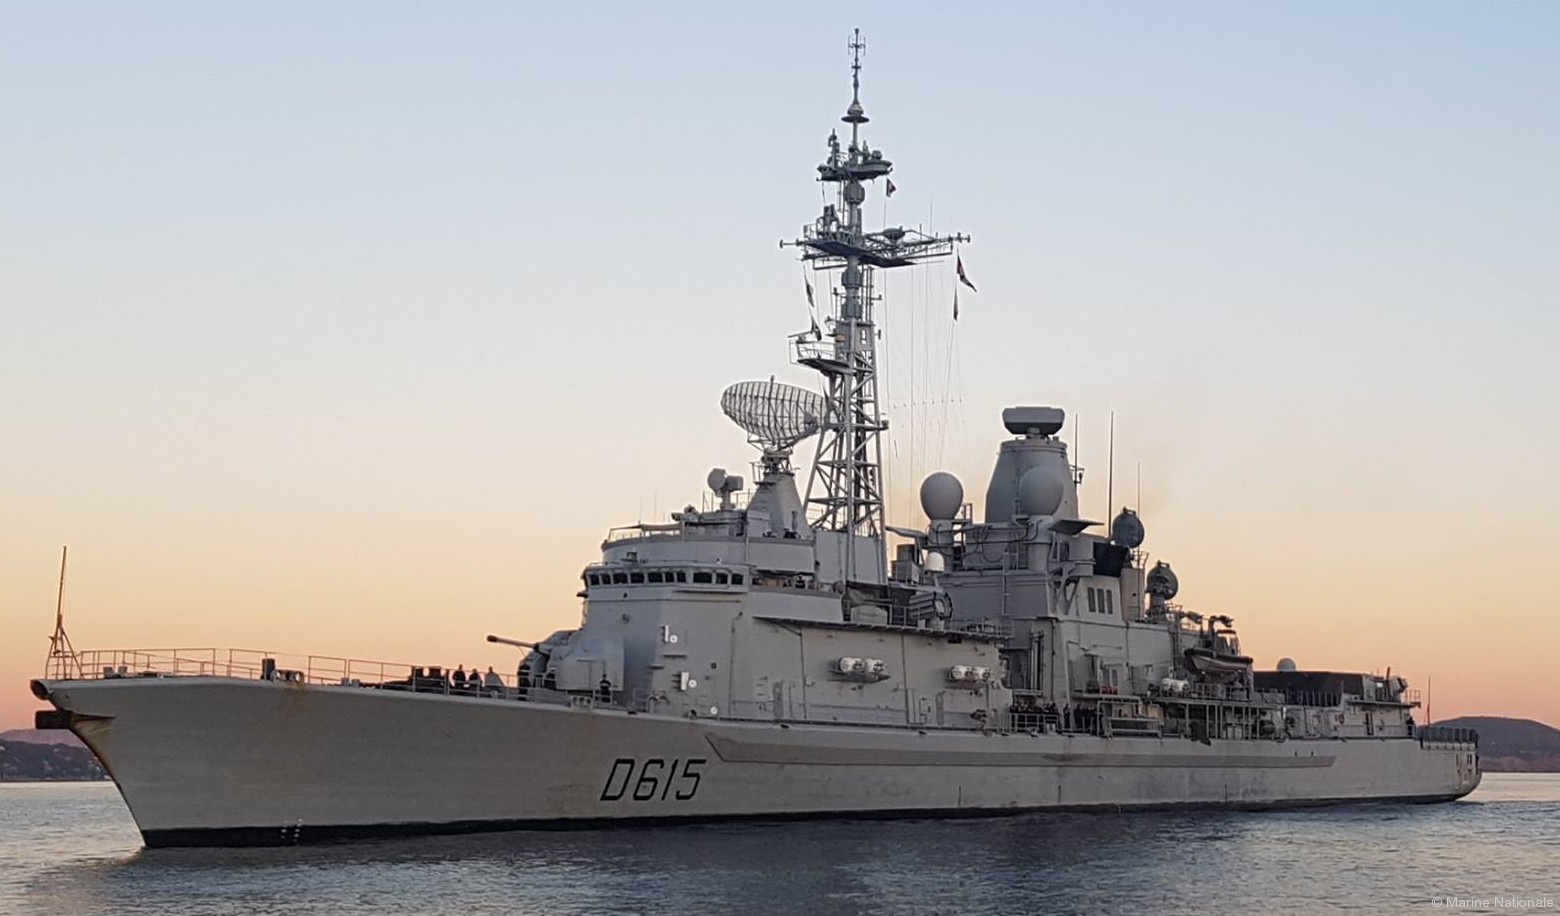 d-615 fs jean bart cassard f70aa class guided missile frigate ffgh ddg french navy marine nationale 11